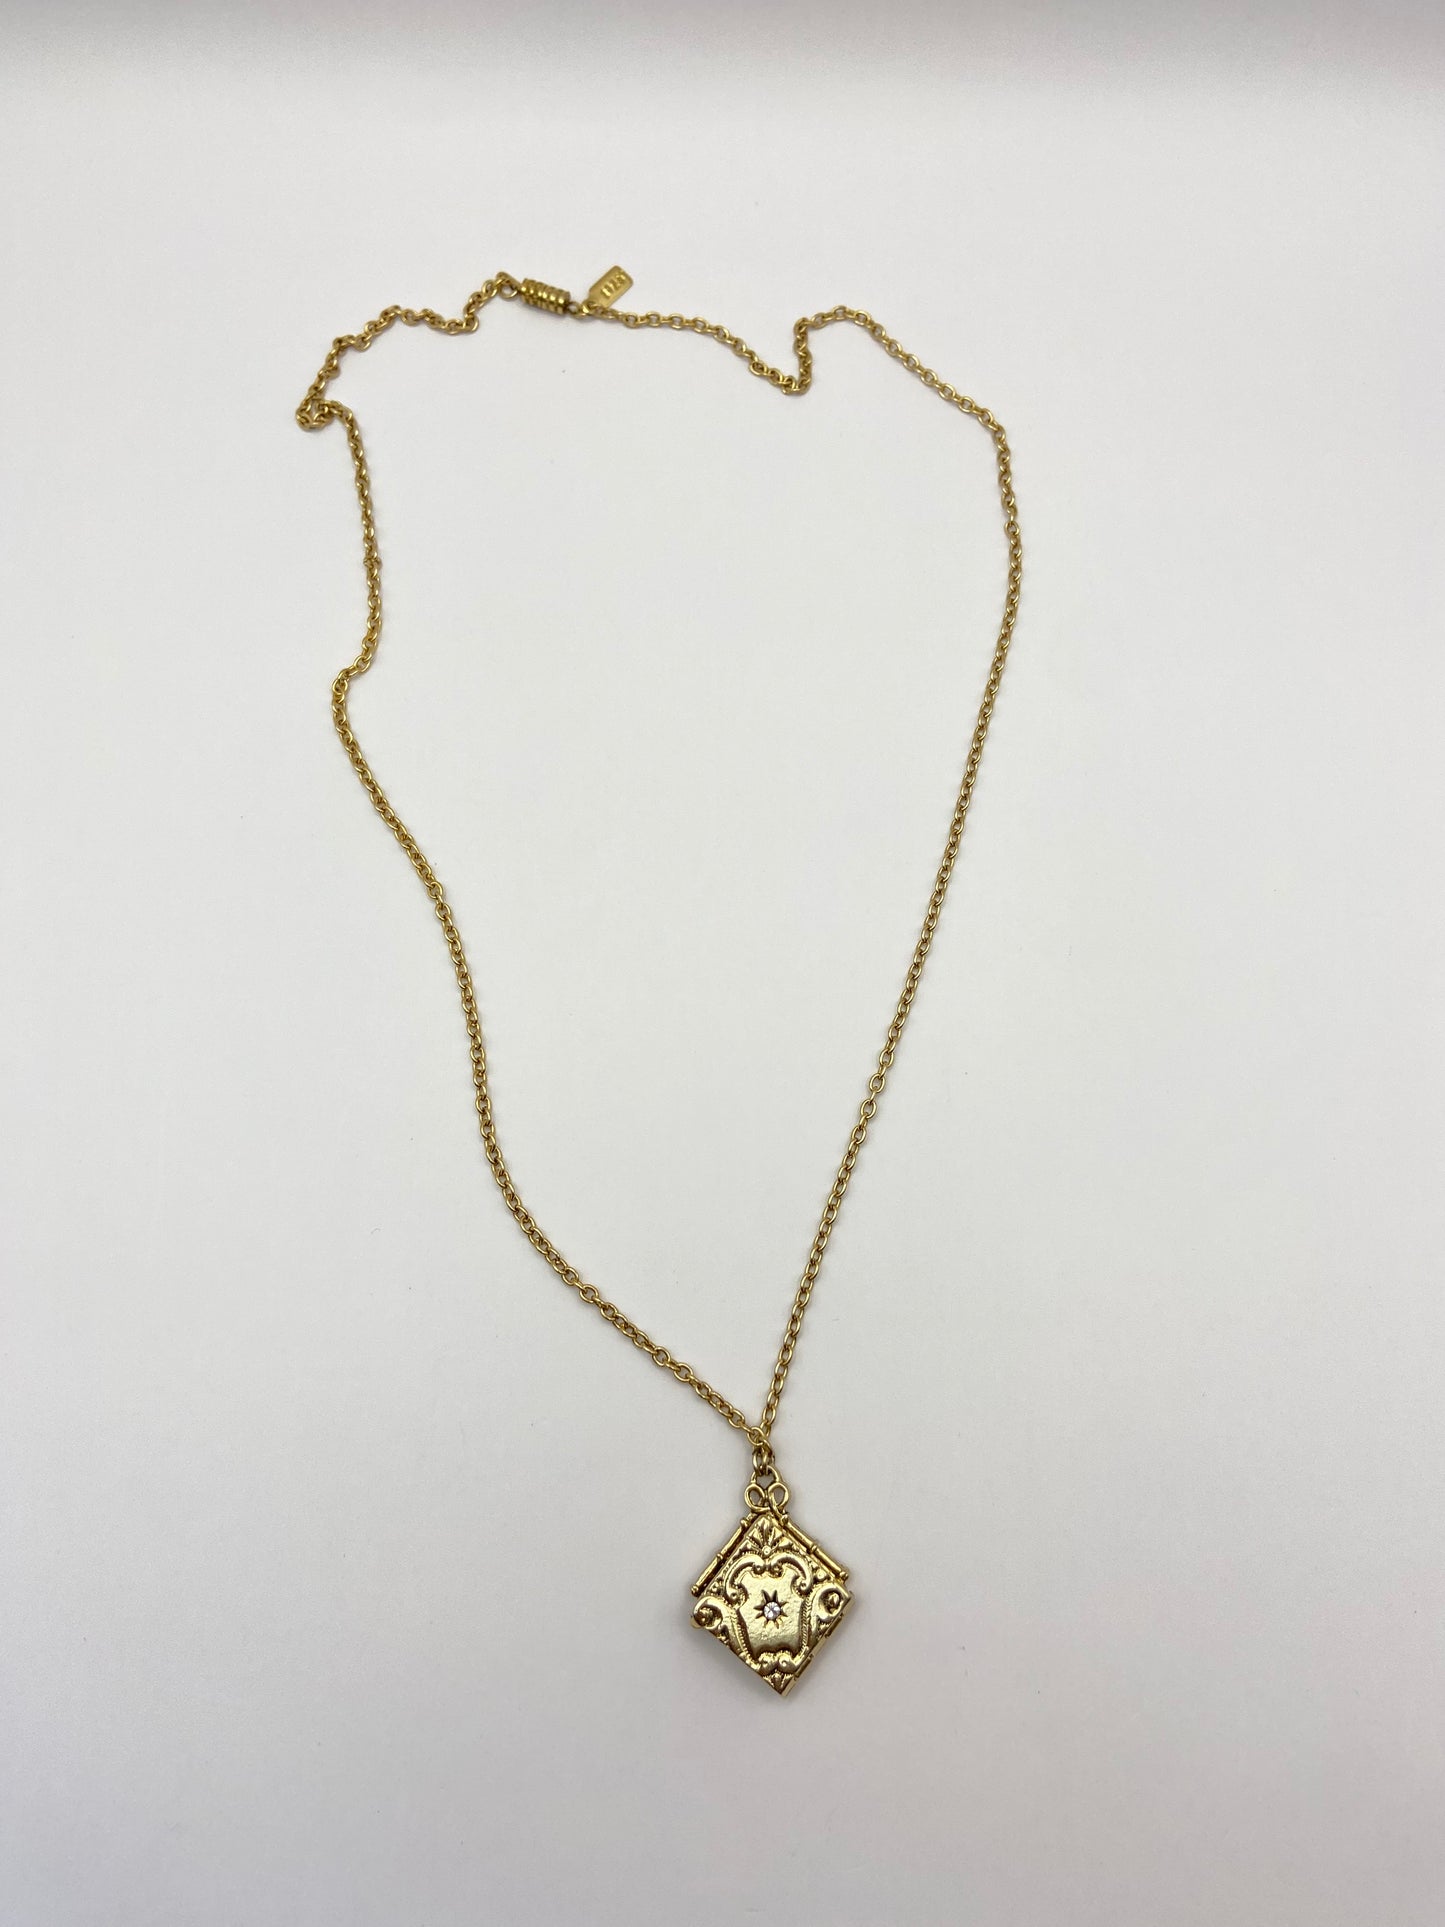 Gold Tone Necklace with Book Pendant